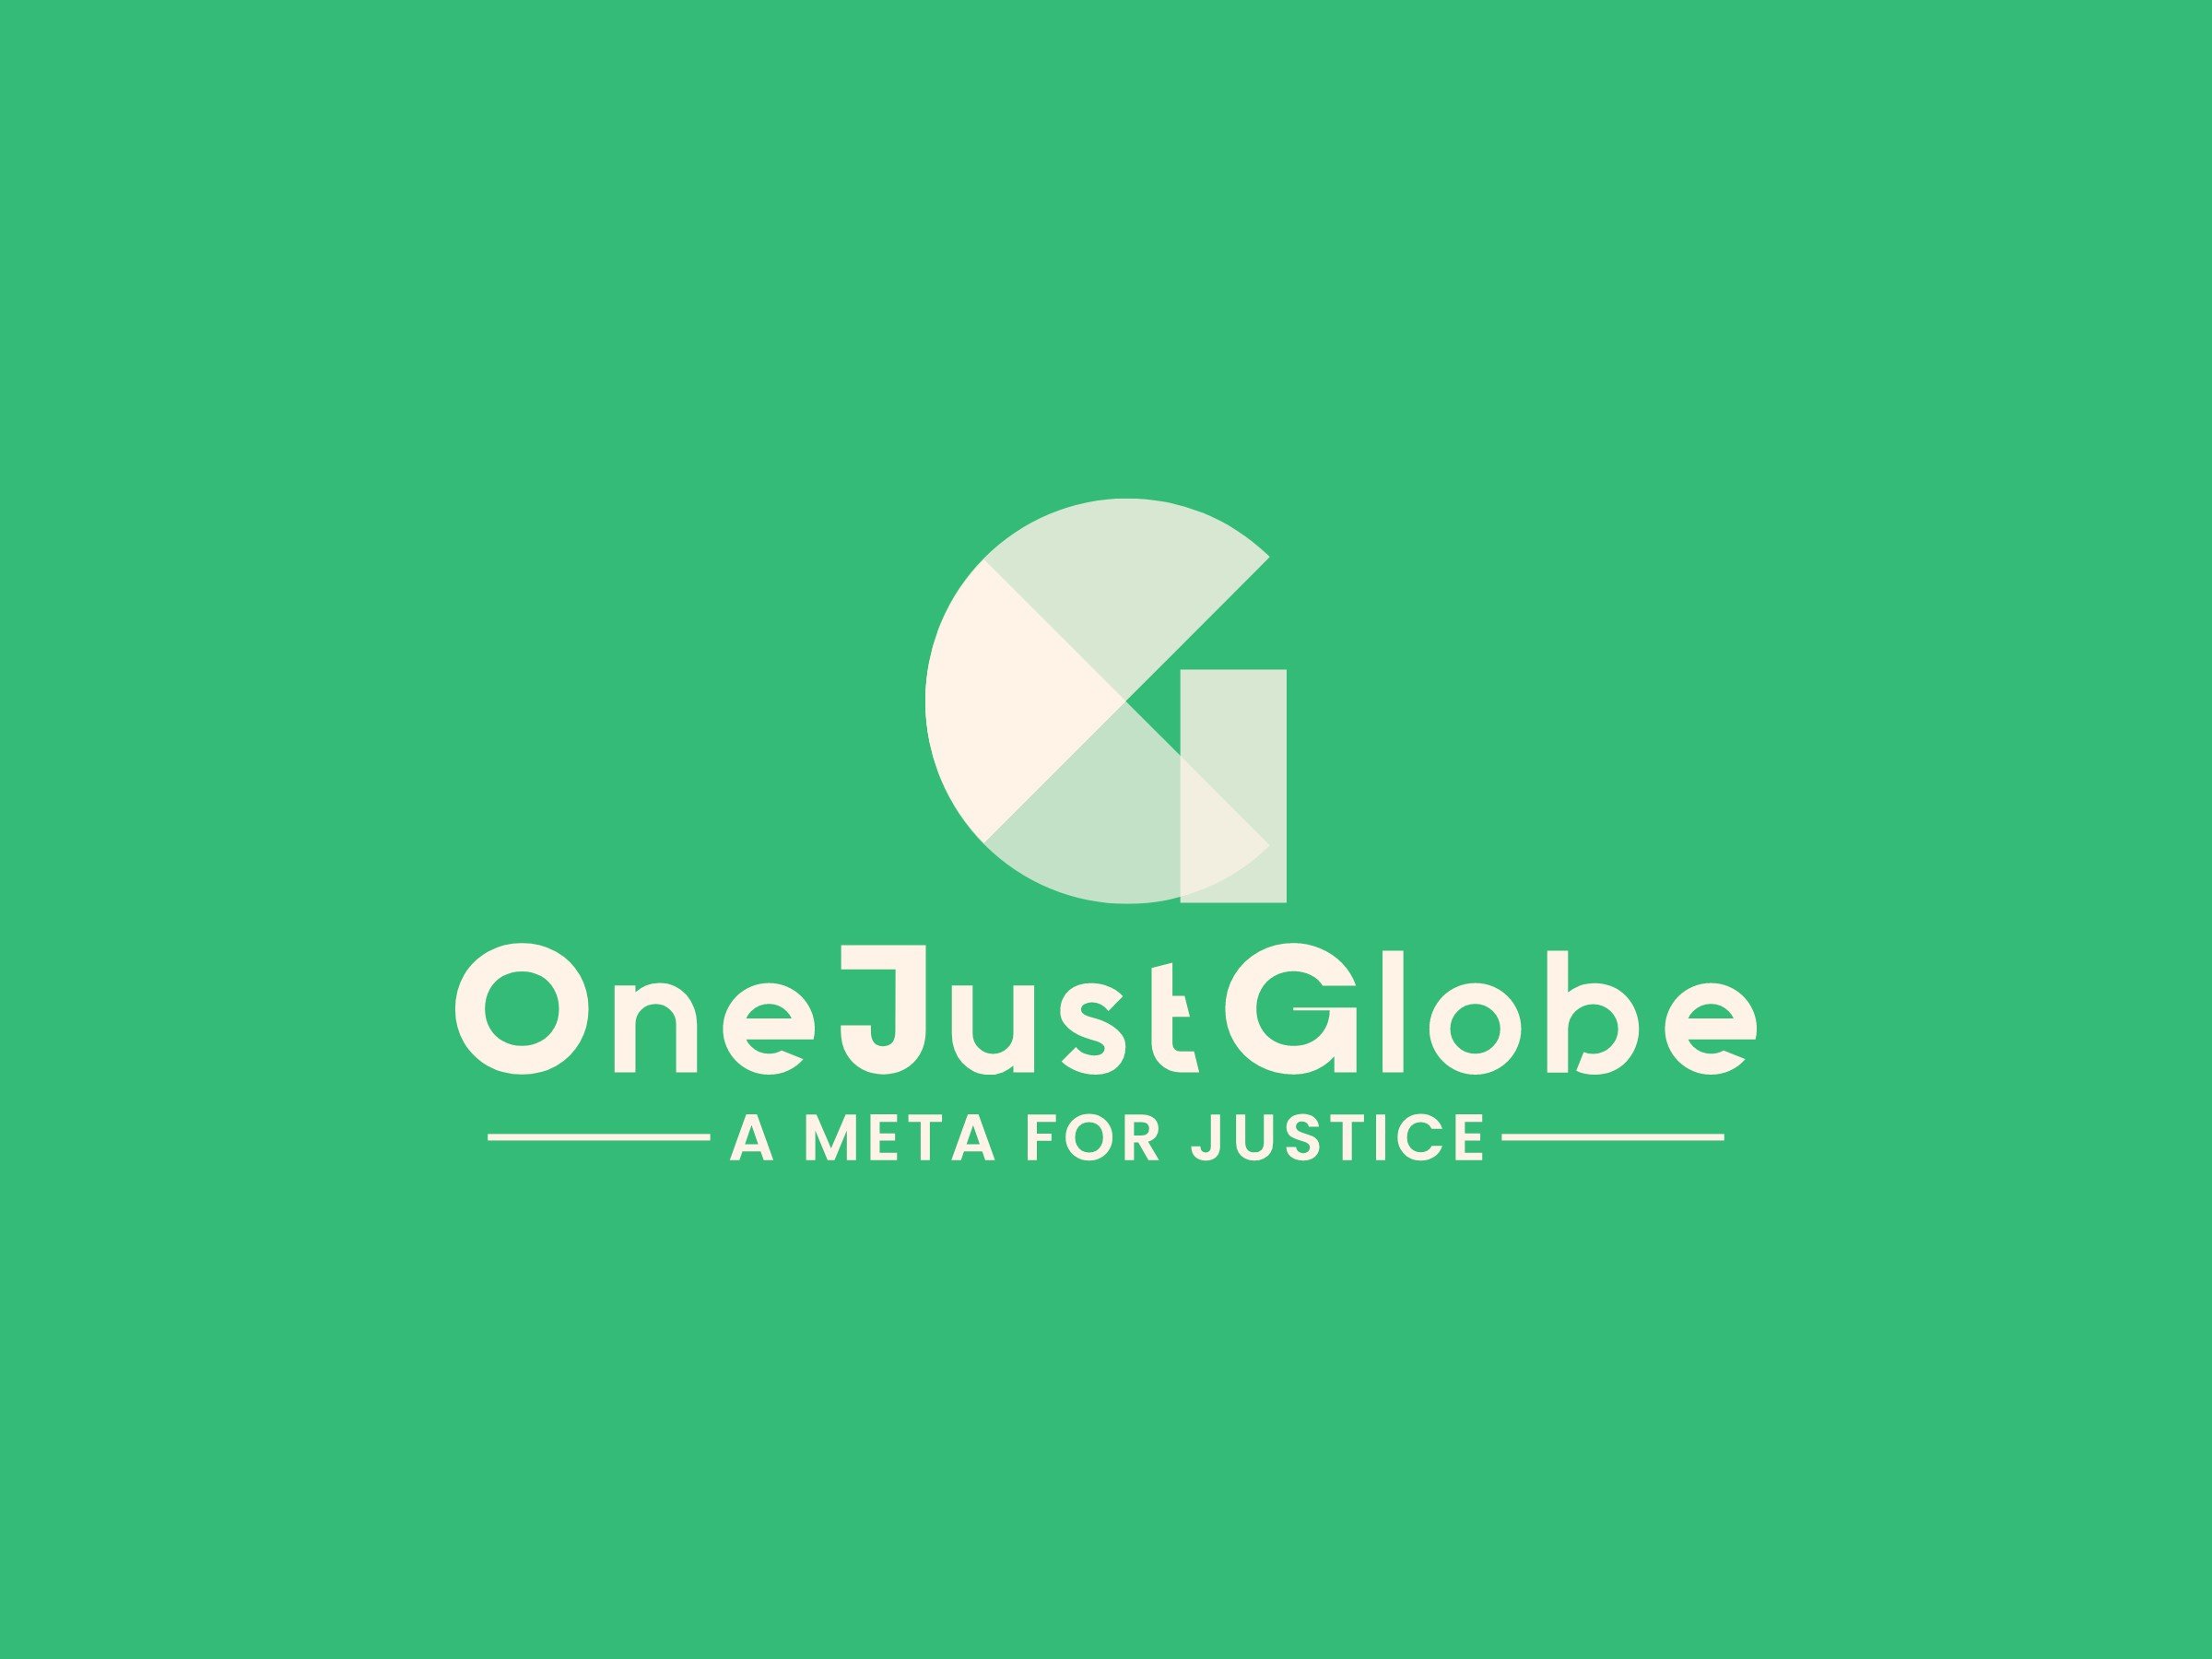 OneJustGlobe - A Meta For Justice